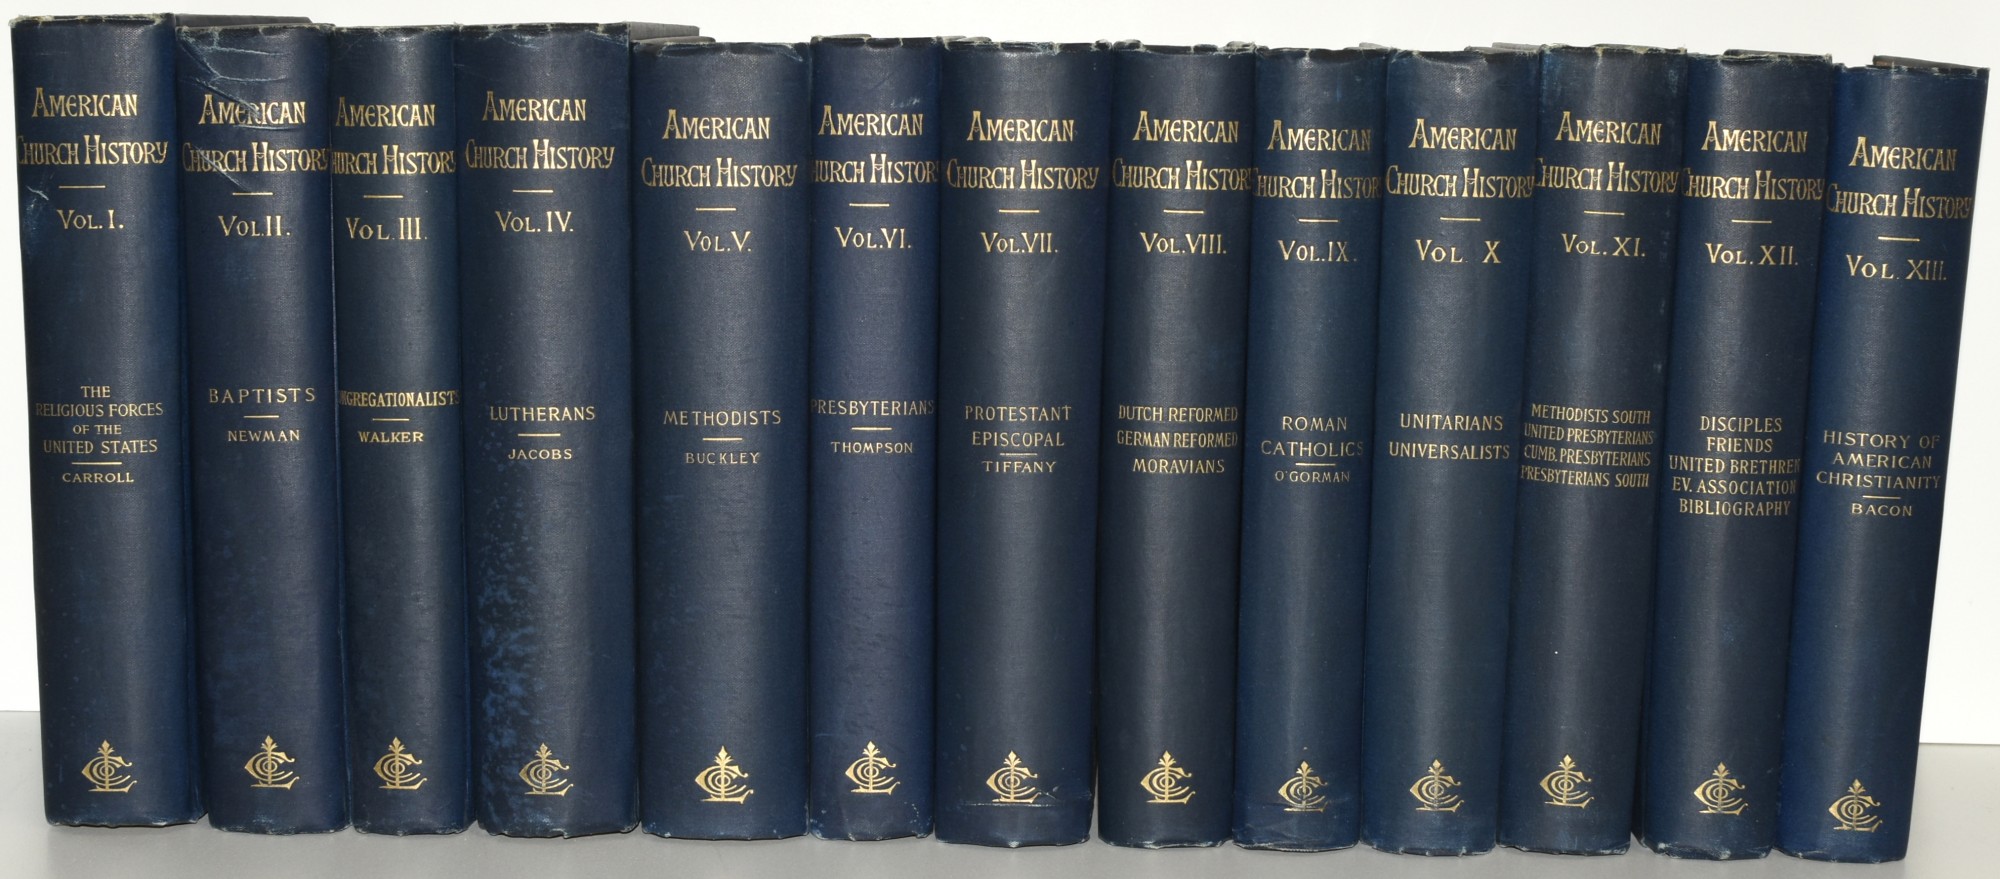 THE AMERICAN CHURCH HISTORY SERIES. CONSISTING OF A SERIES OF DENOMINATIONAL HISTORIES PUBLISHED UNDER THE AUSPICES OF THE AMERICAN SOCIETY OF CHURCH HISTORY (13 Volumes; Complete) - Philip Schaff; Henry Codman Potter; Samuel Macauley Jackson